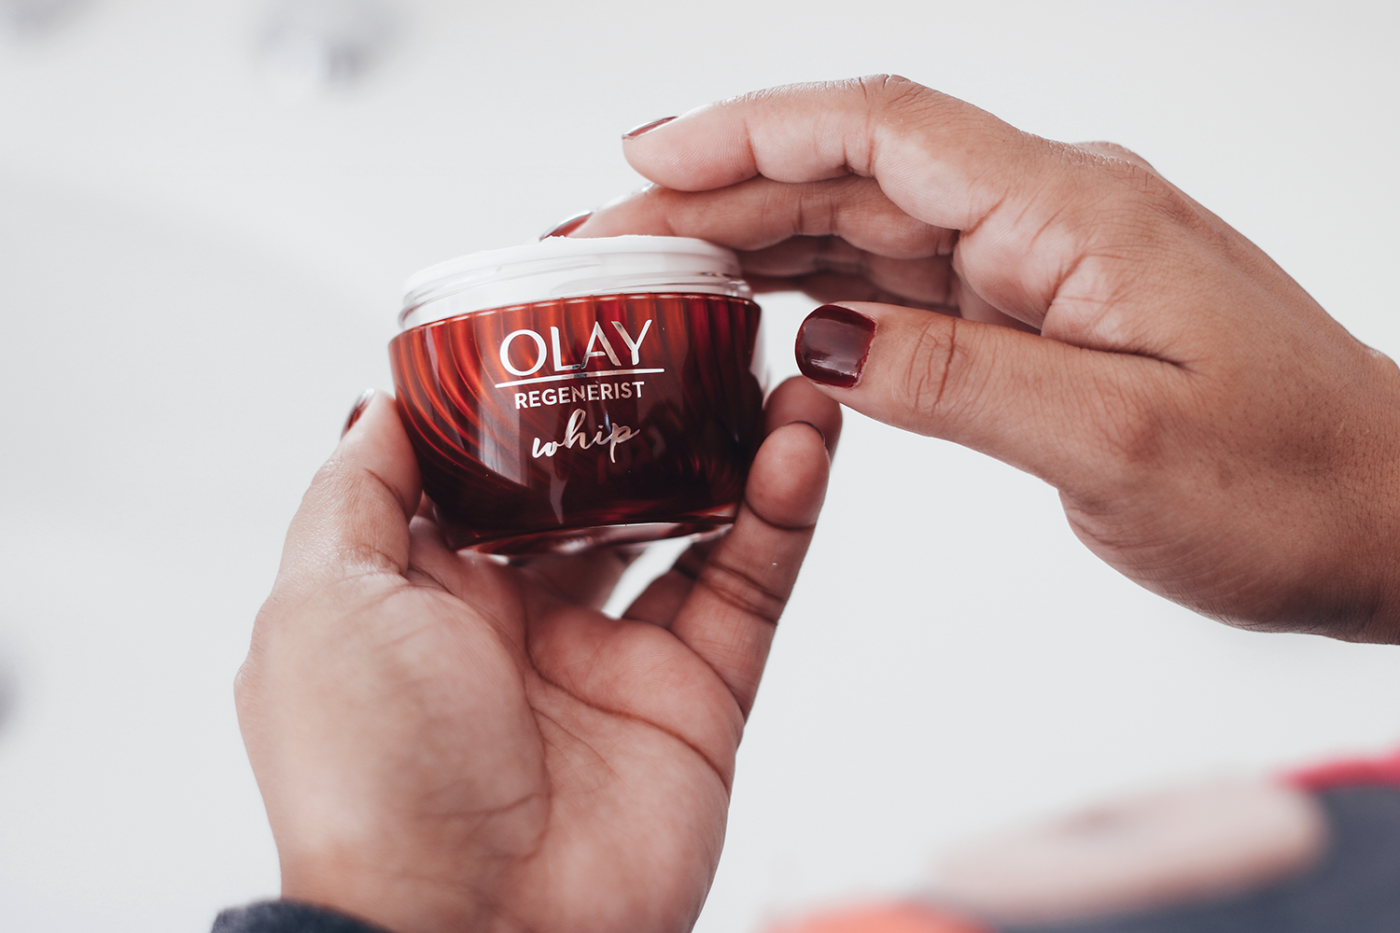 Looking for the perfect moisturizer this winter? See why you NEED to try the NEW Olay Regenerist Whip ASAP!